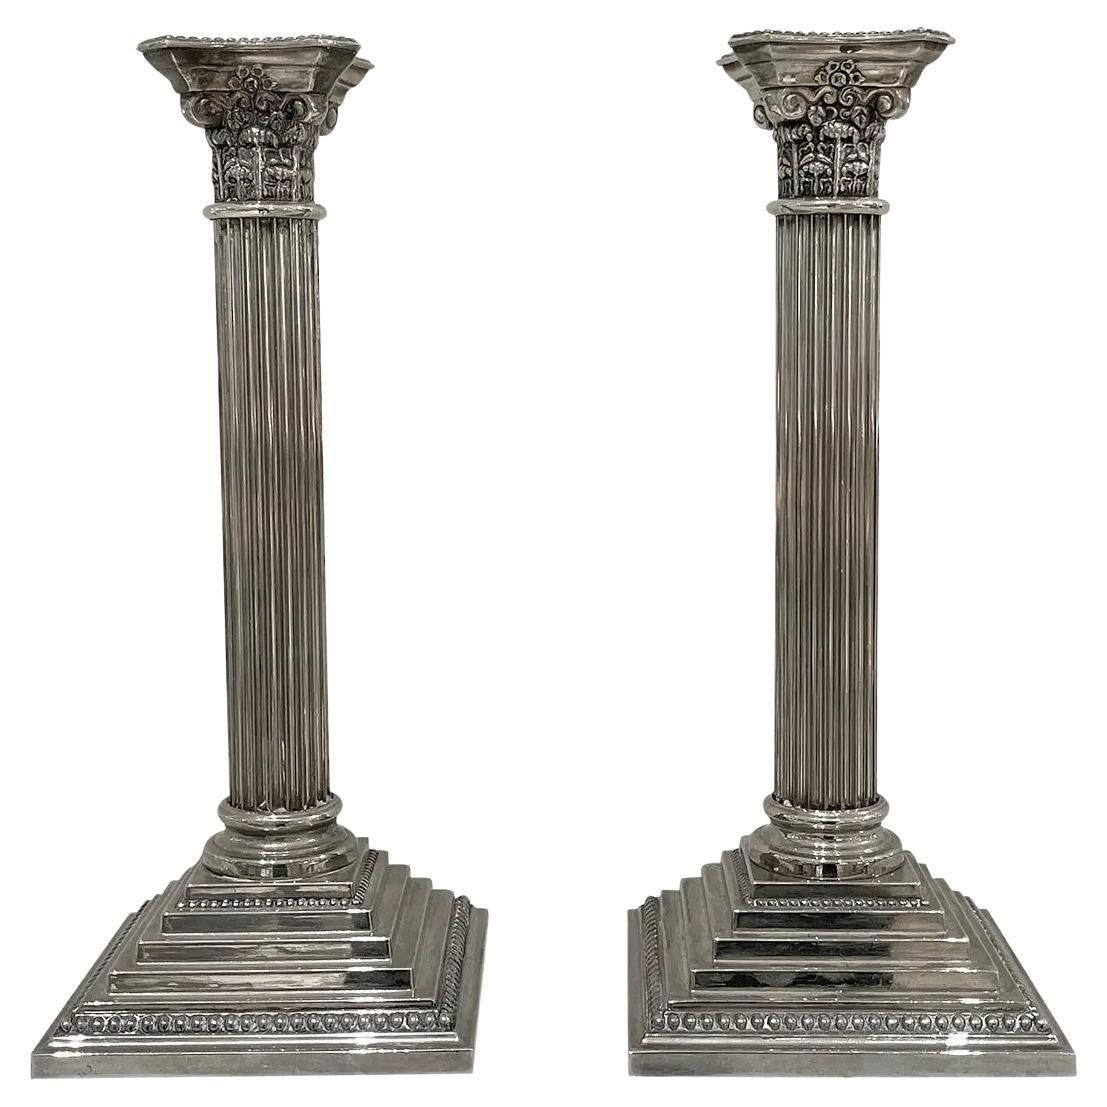 20th Century American Pair of Silver-Plated Metal Candle Holders by Godinger